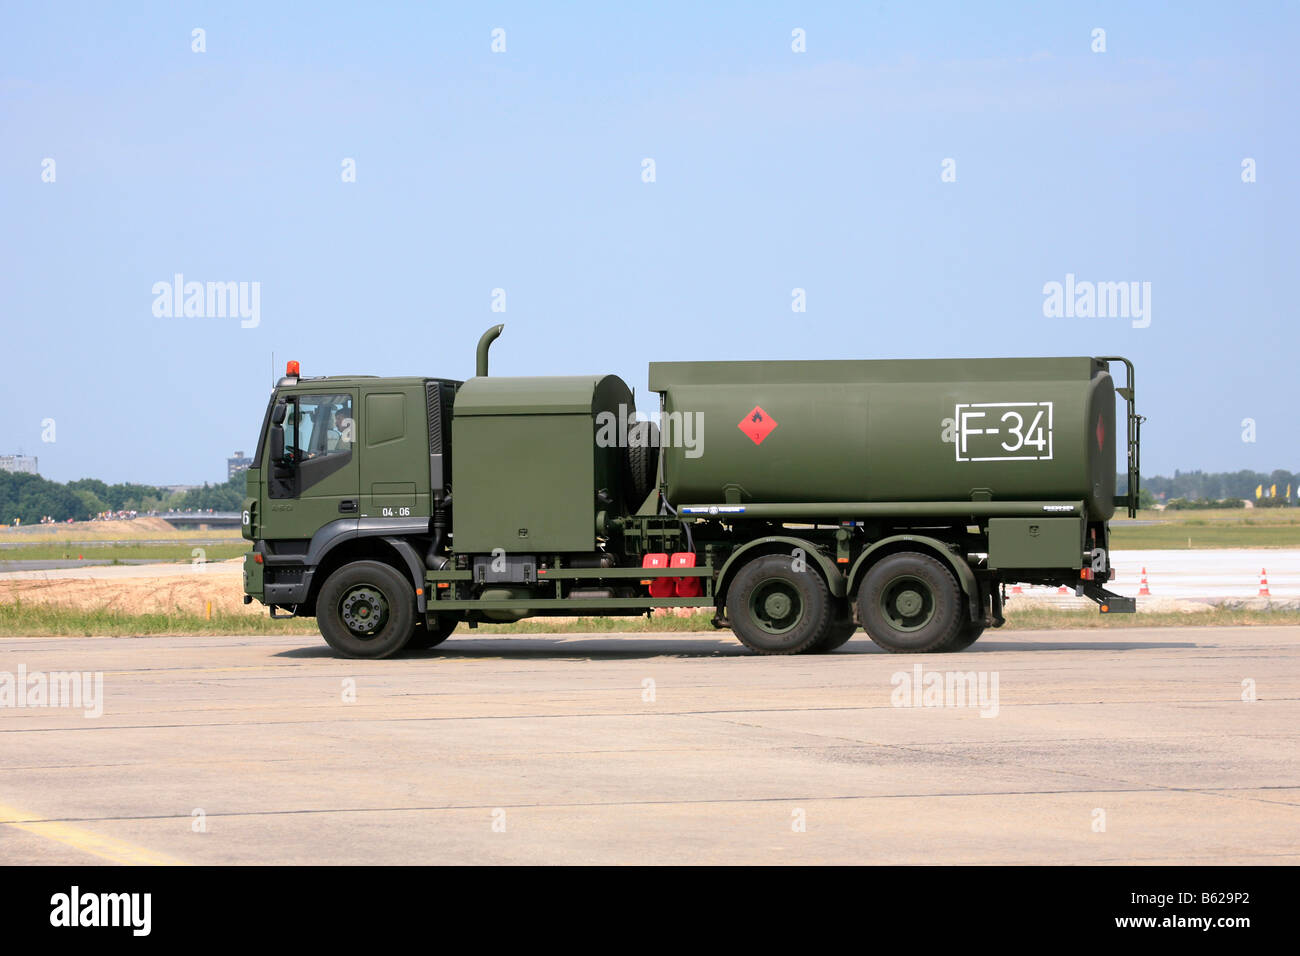 Military tanker, German army, maintenance vehicle for refueling military planes Stock Photo